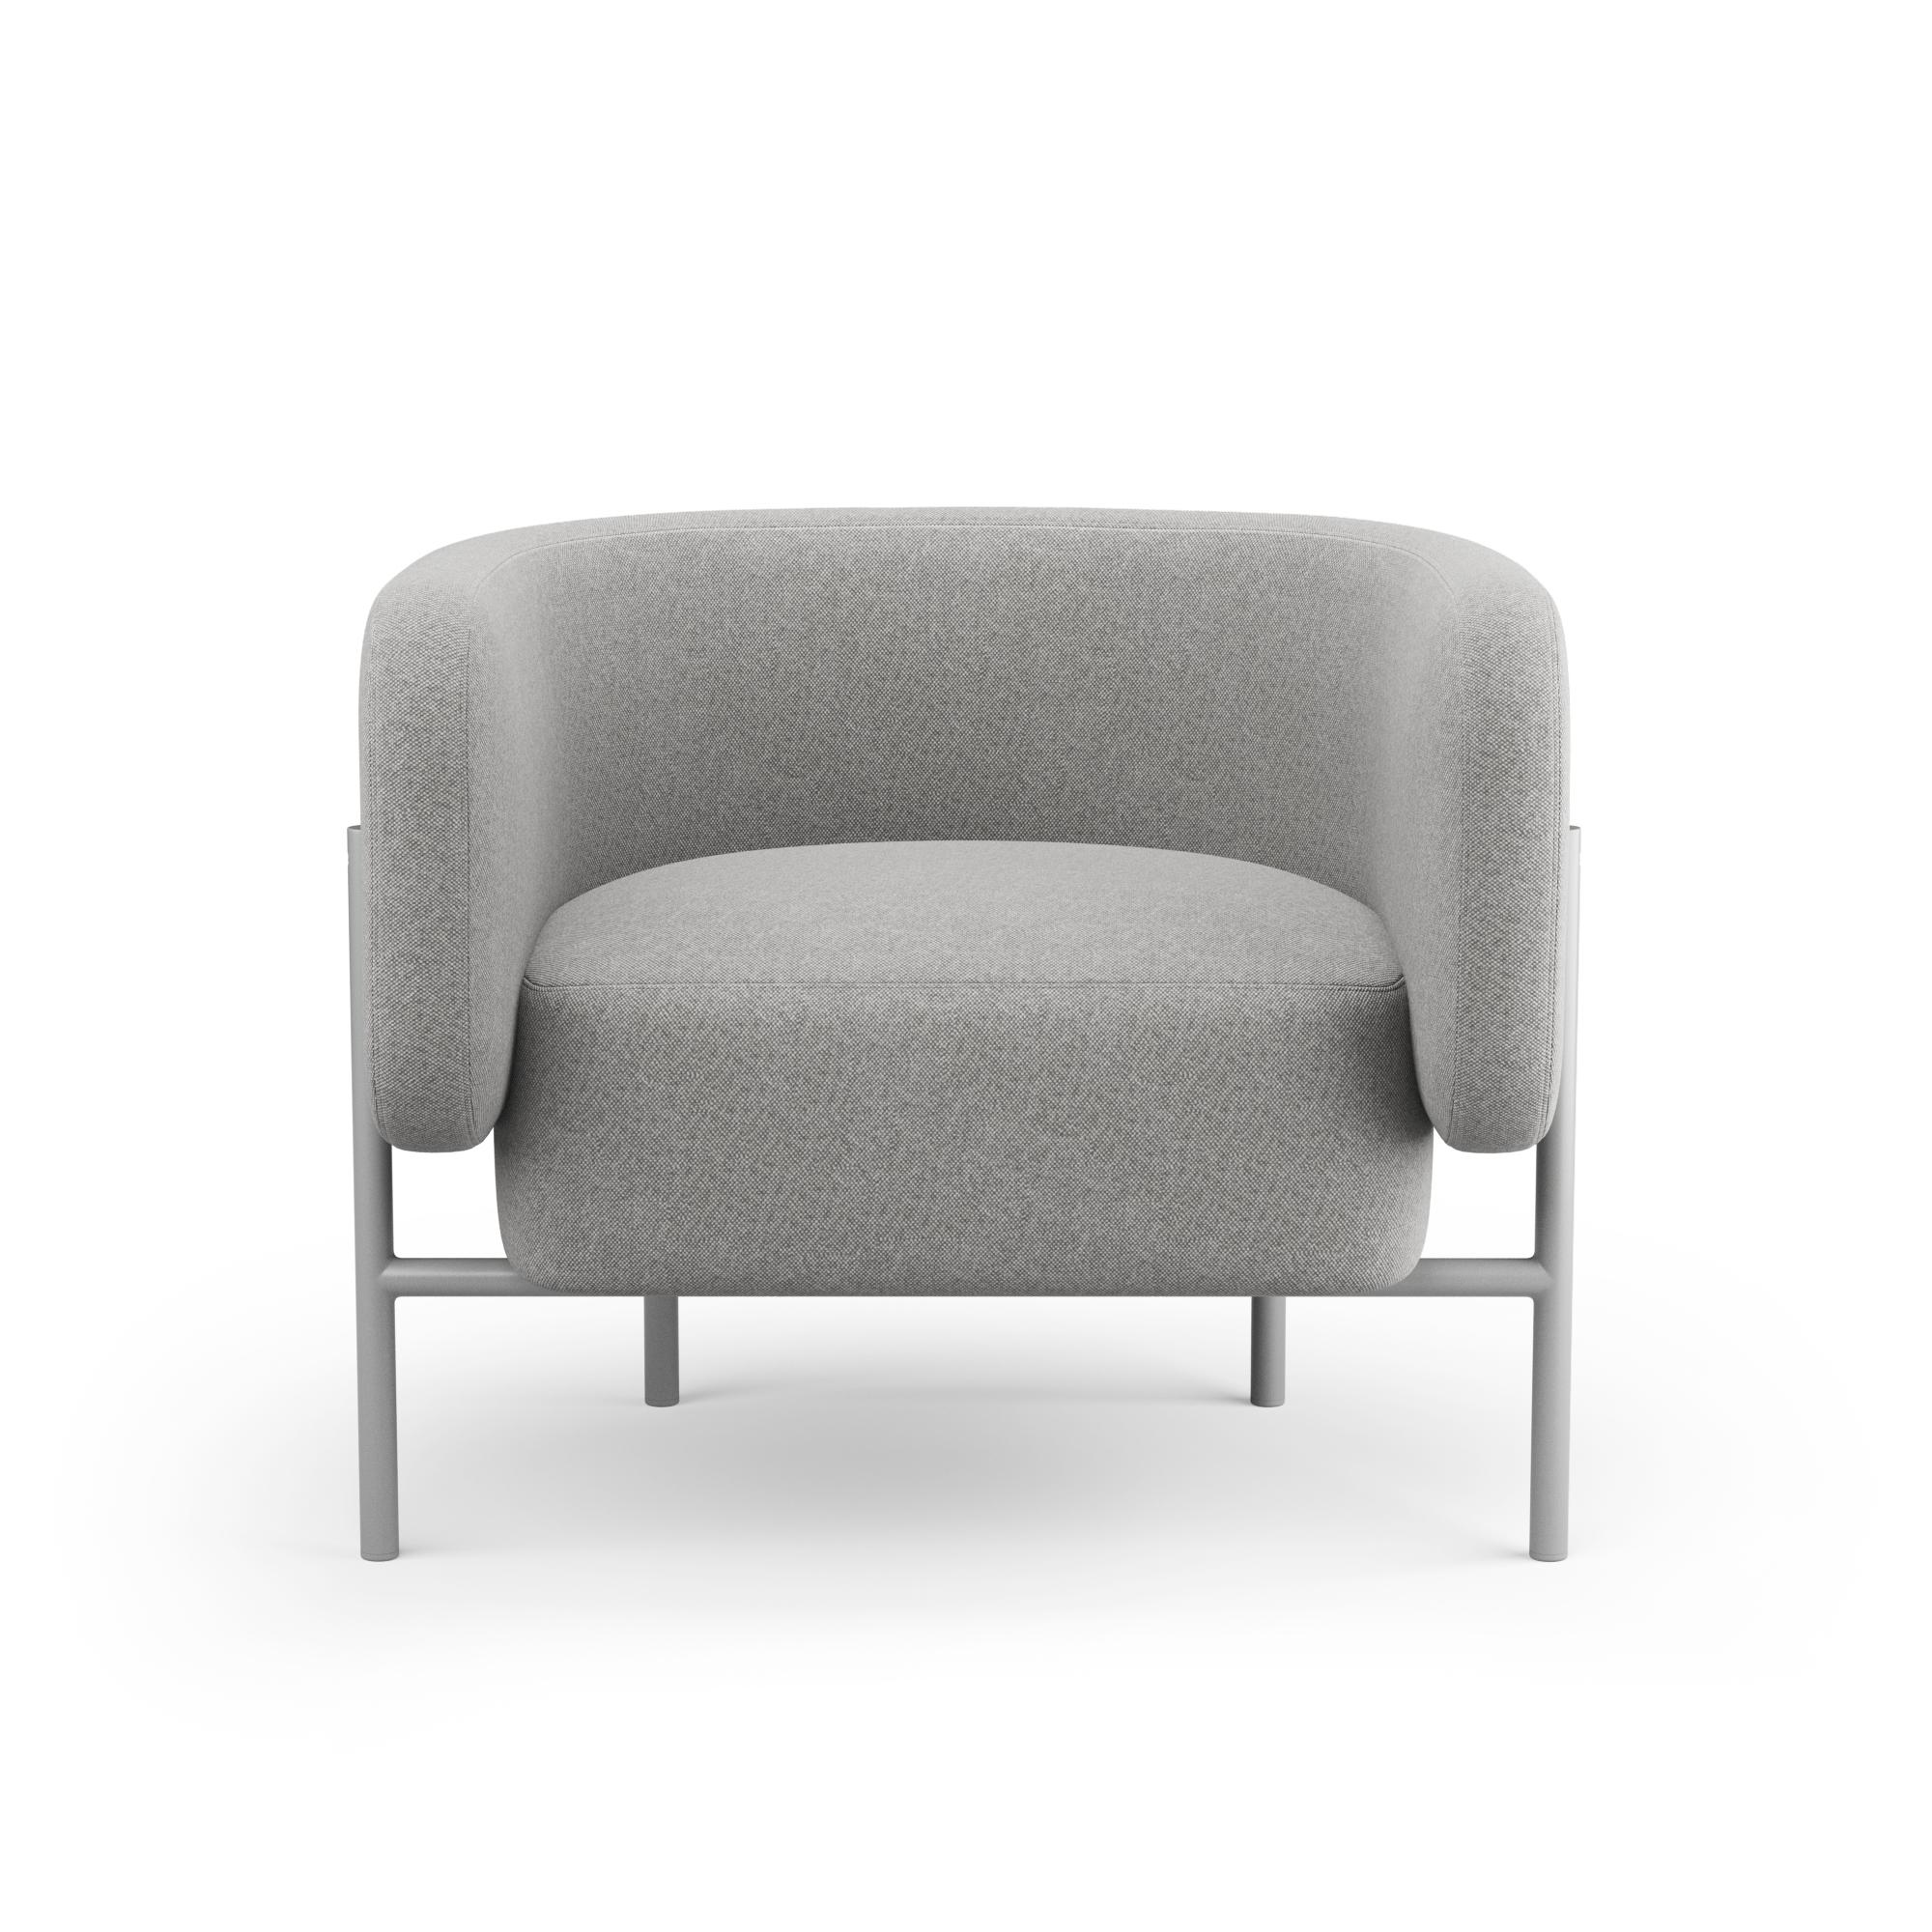 Modern Hayche Abrazo Armchair - Gray, UK, Made to Order For Sale